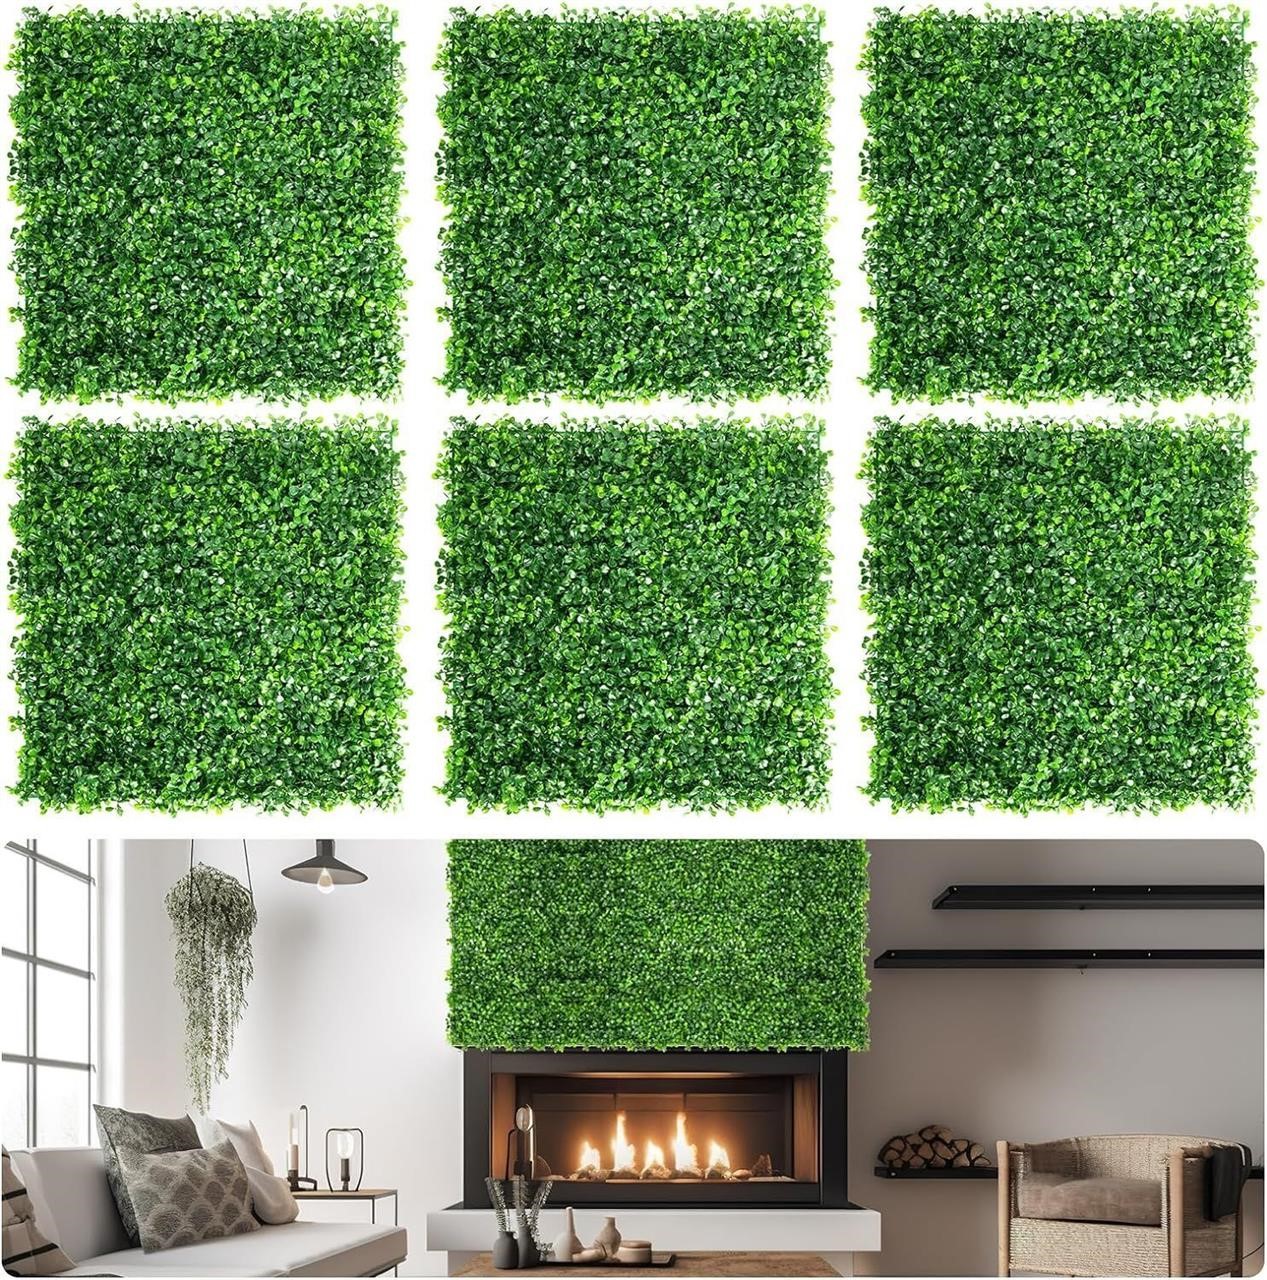 Artificial Grass Wall Panels, 16 Pack 20x20in